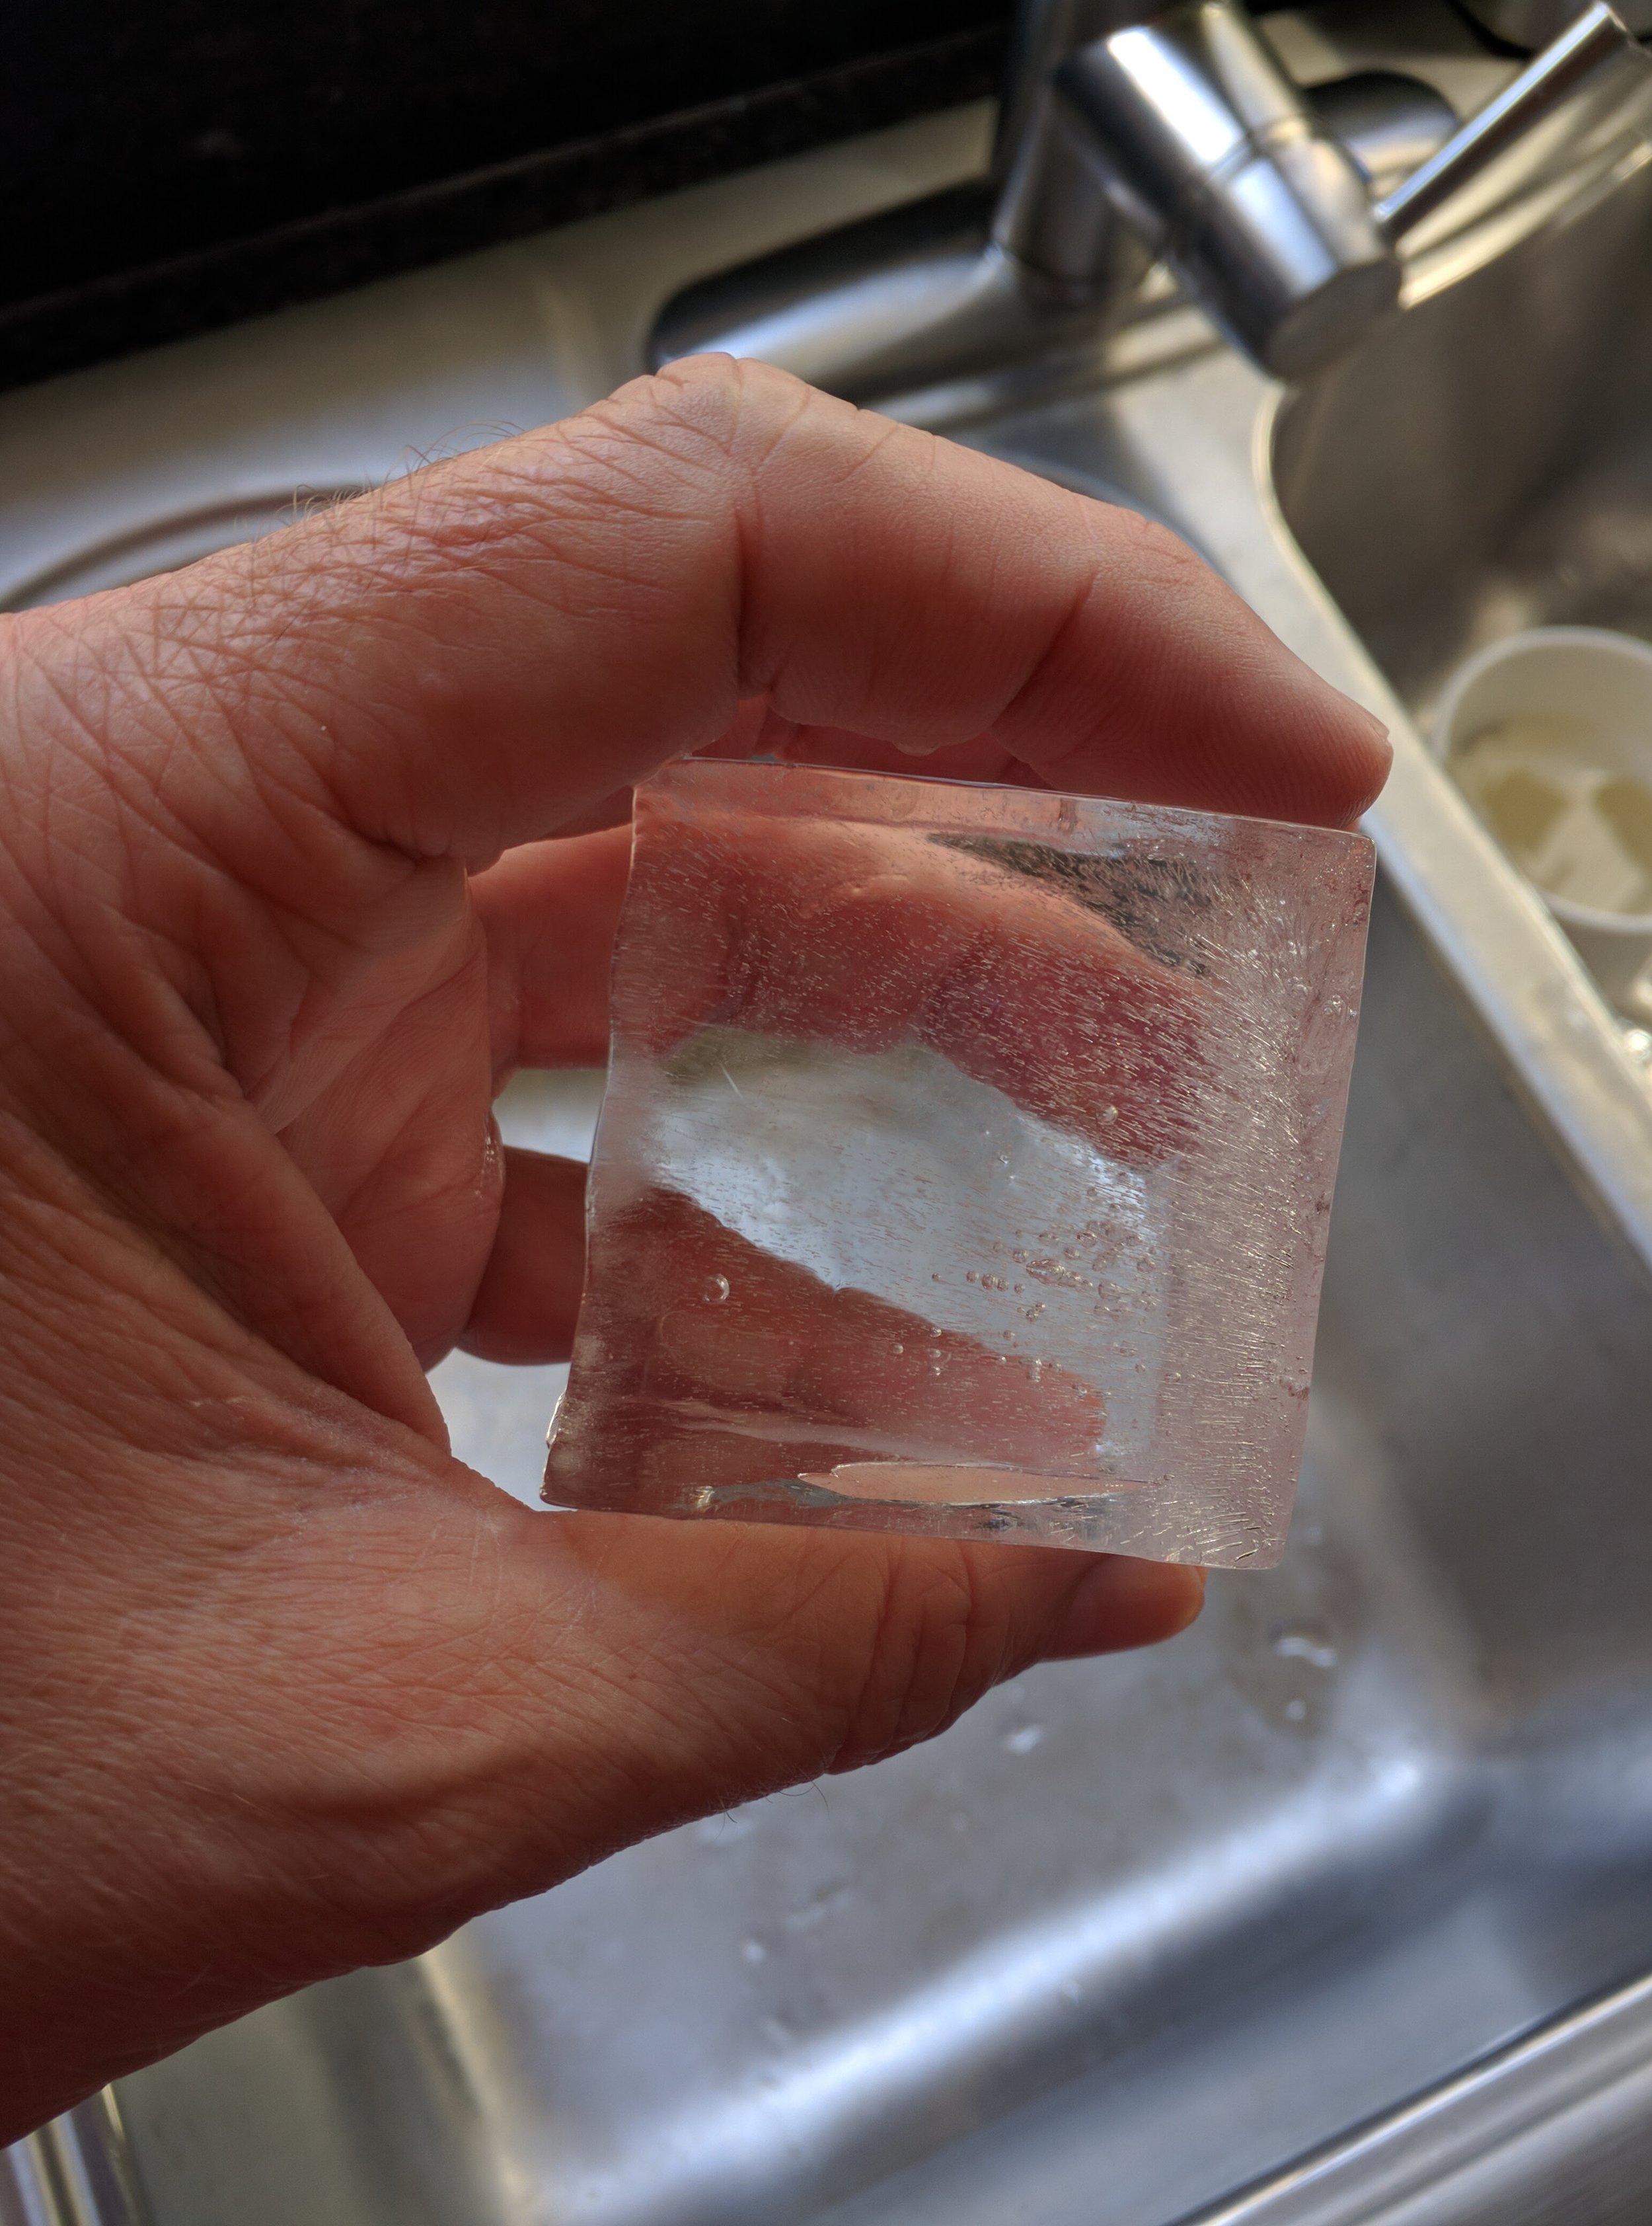 True Cubes Clear Ice Cube Tray - Core77